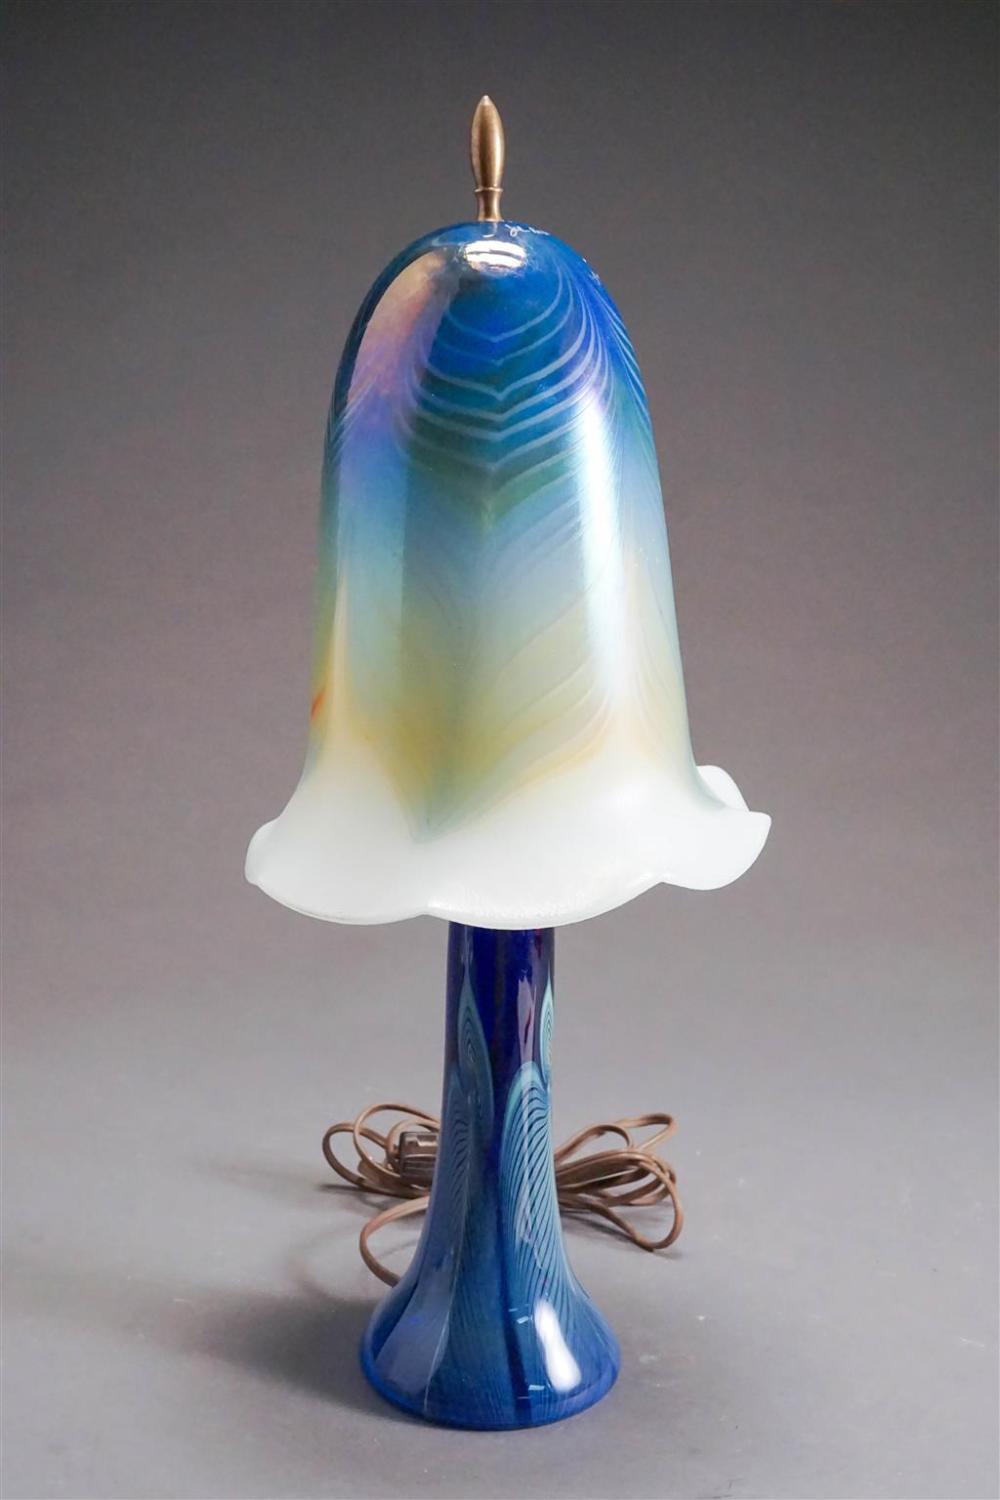 ART GLASS PULLED FEATHER DESIGN 329bdd